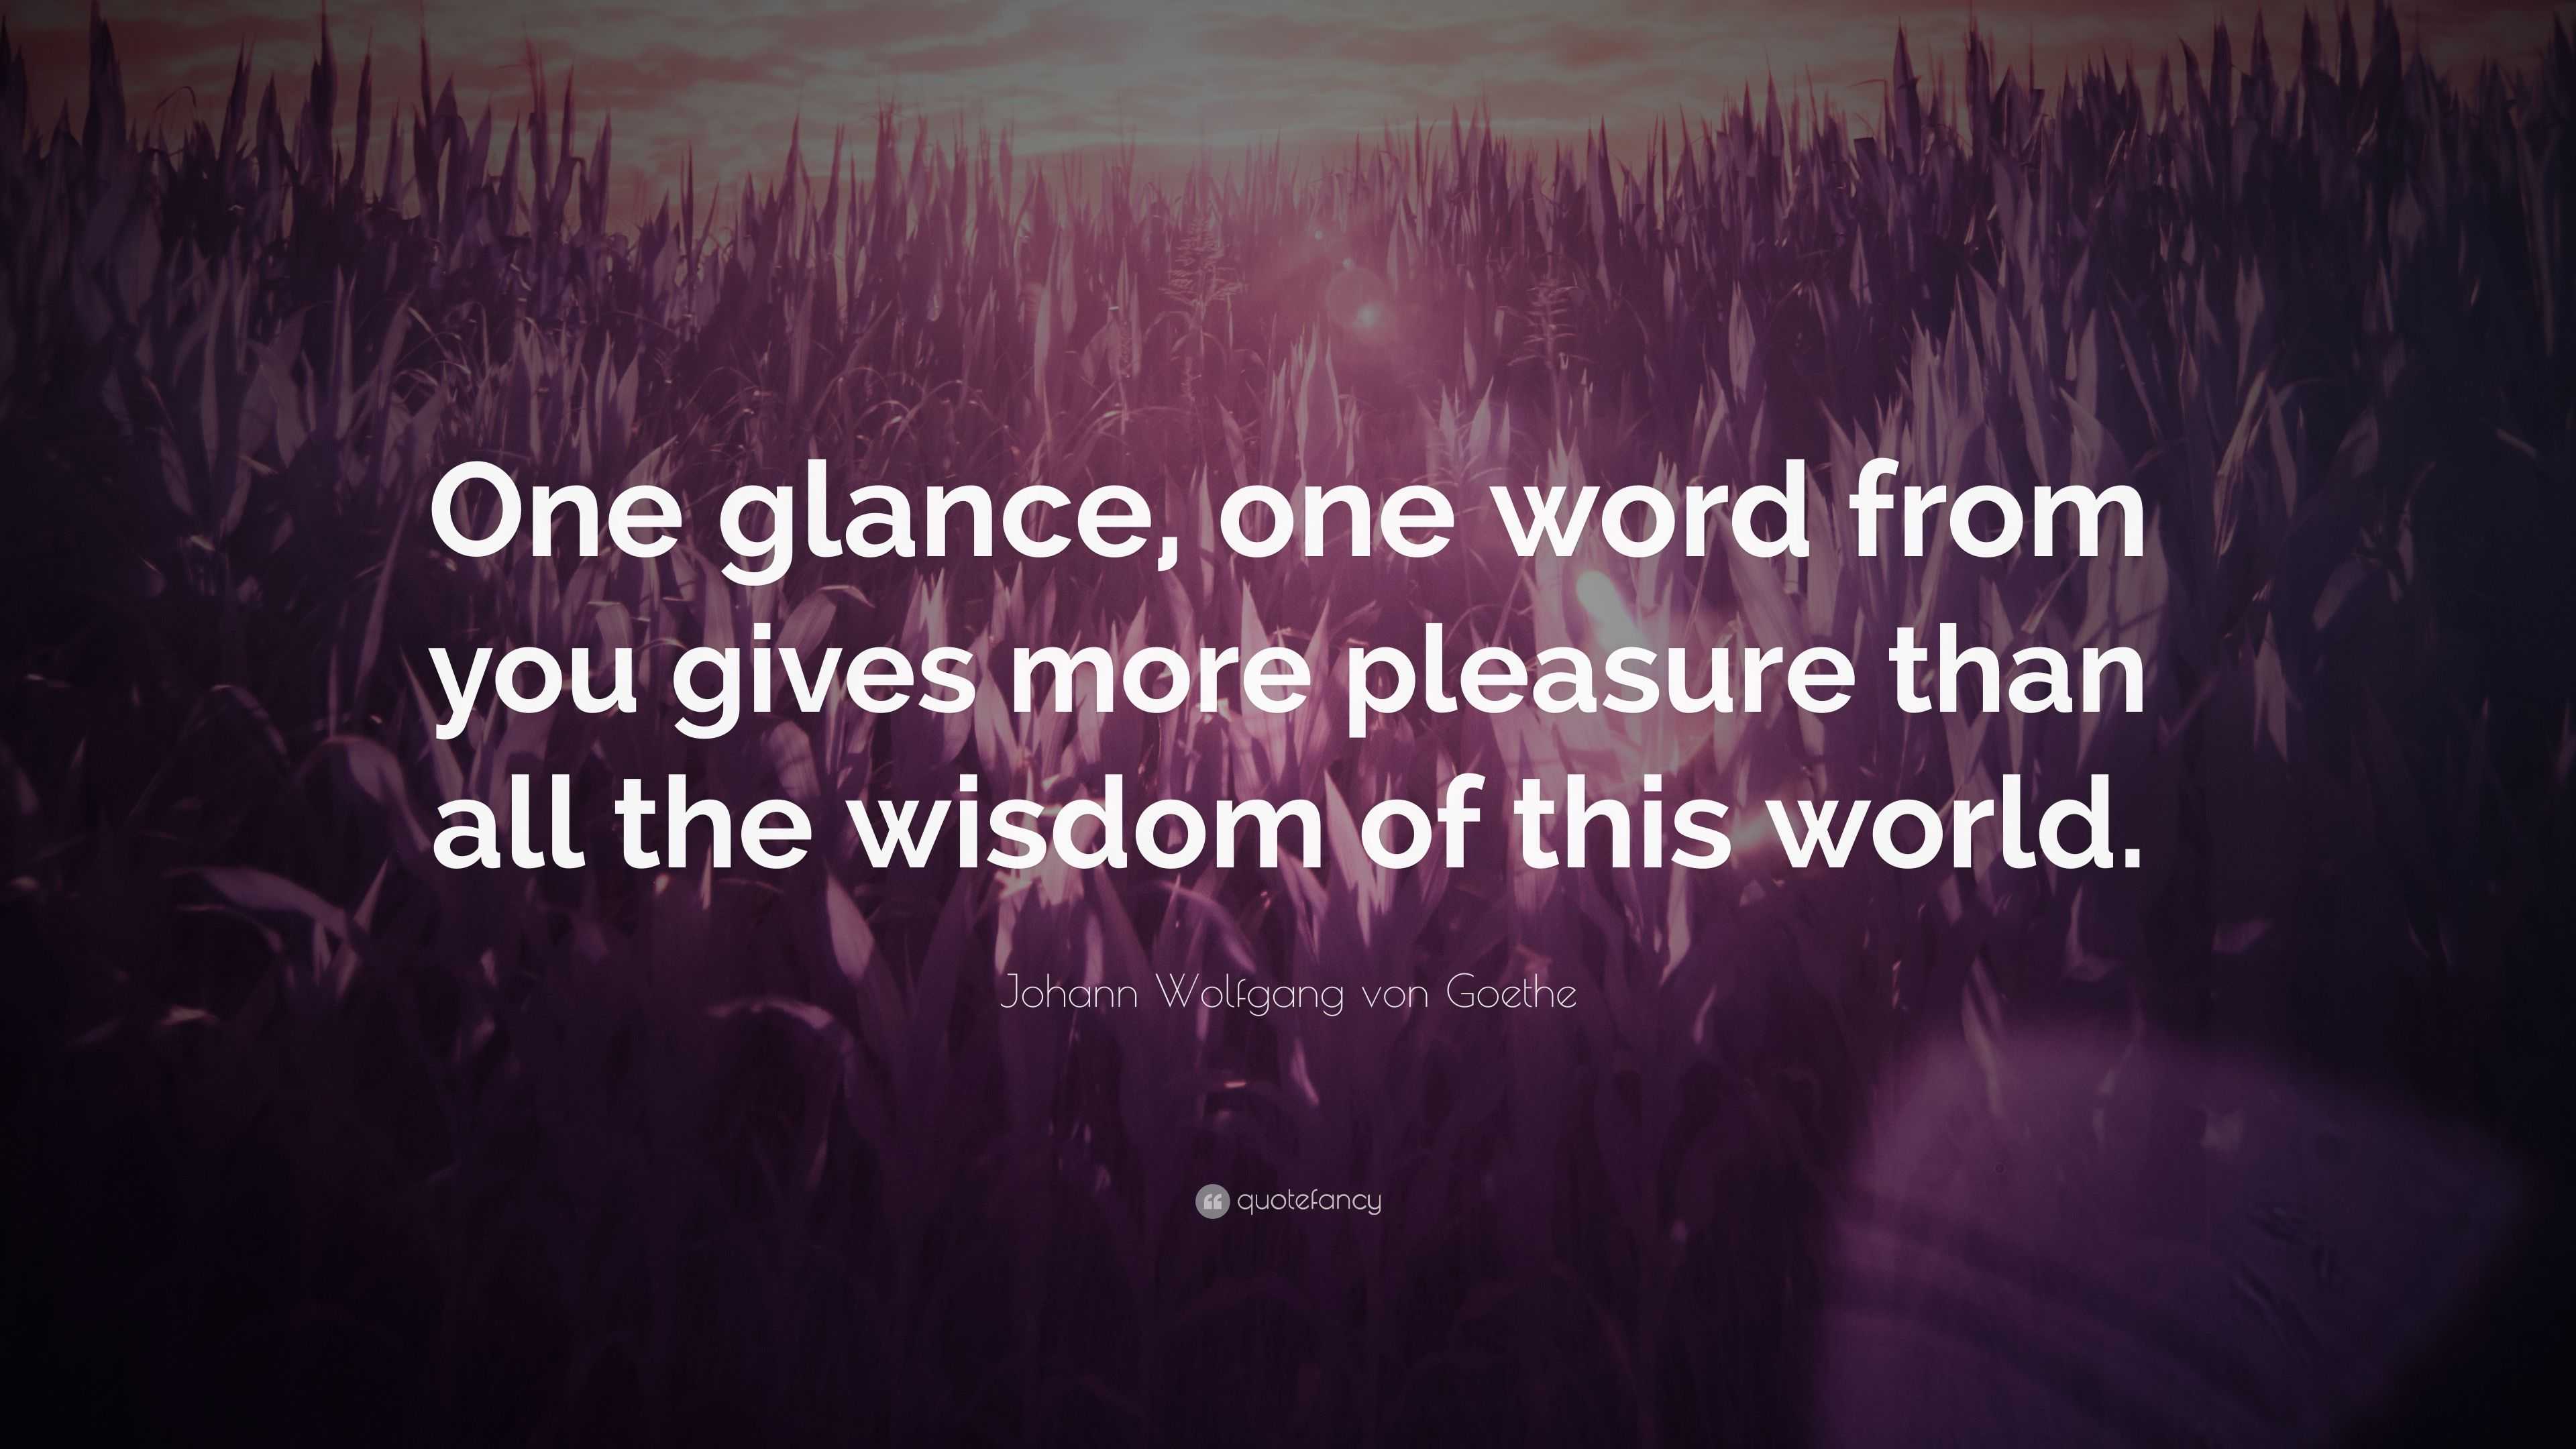 Johann Wolfgang von Goethe Quote “ e glance one word from you gives more